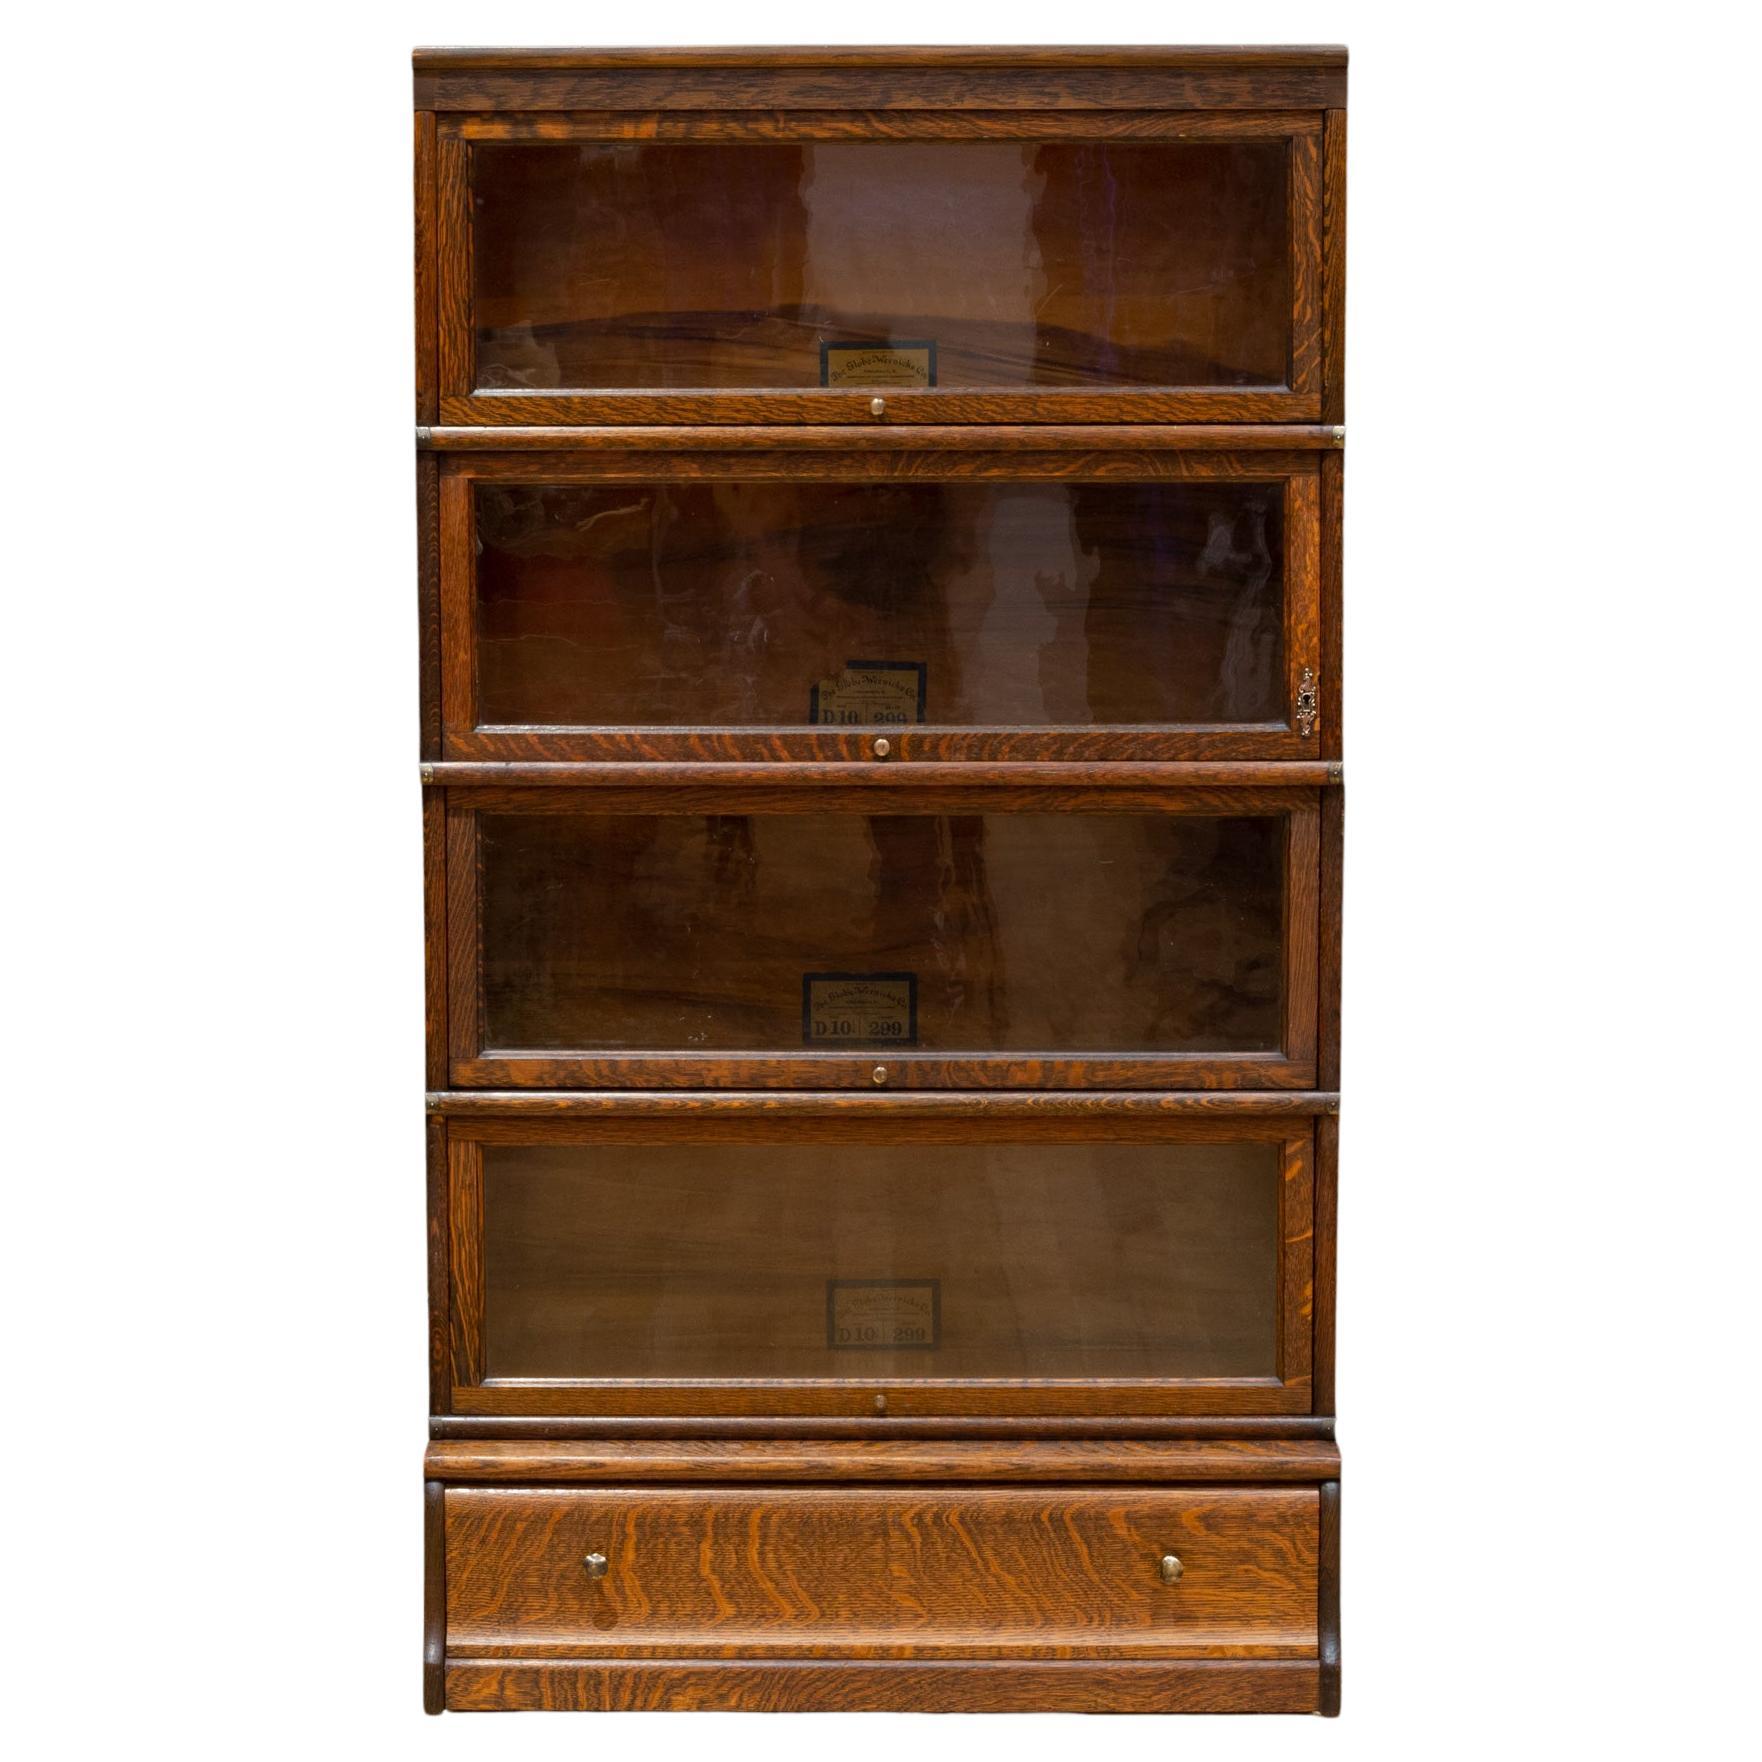 Globe-Wernicke 4 Stack Lawyer's Bookcase with Rare Bottom Drawer c.1910